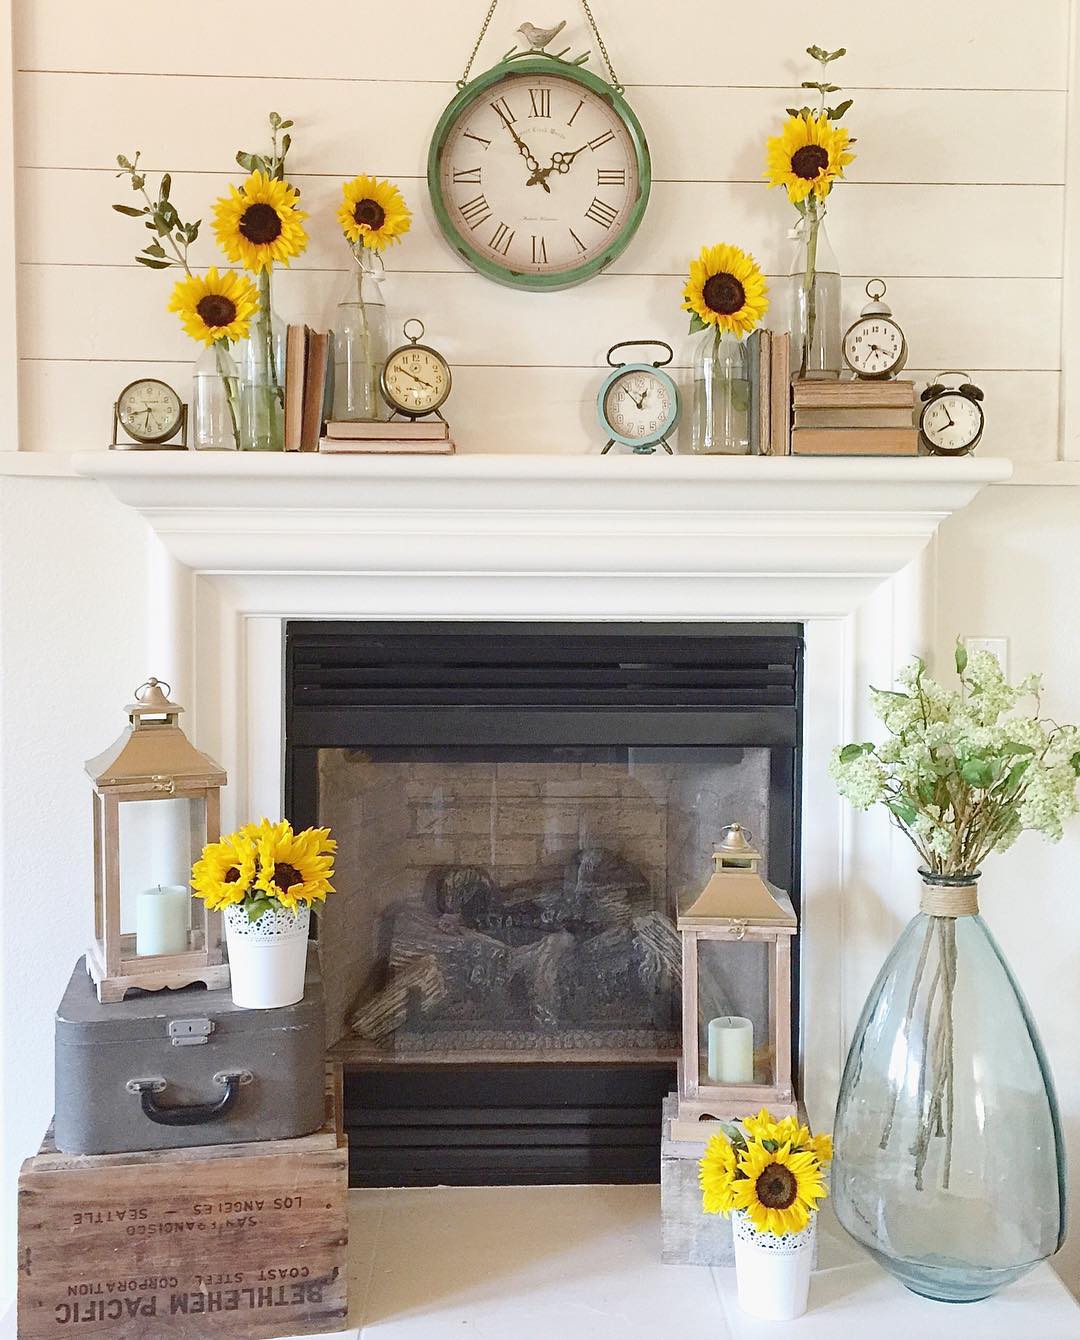 Rustic Sunflower Charm for a Welcoming Summer Fireplace Mantel Decor